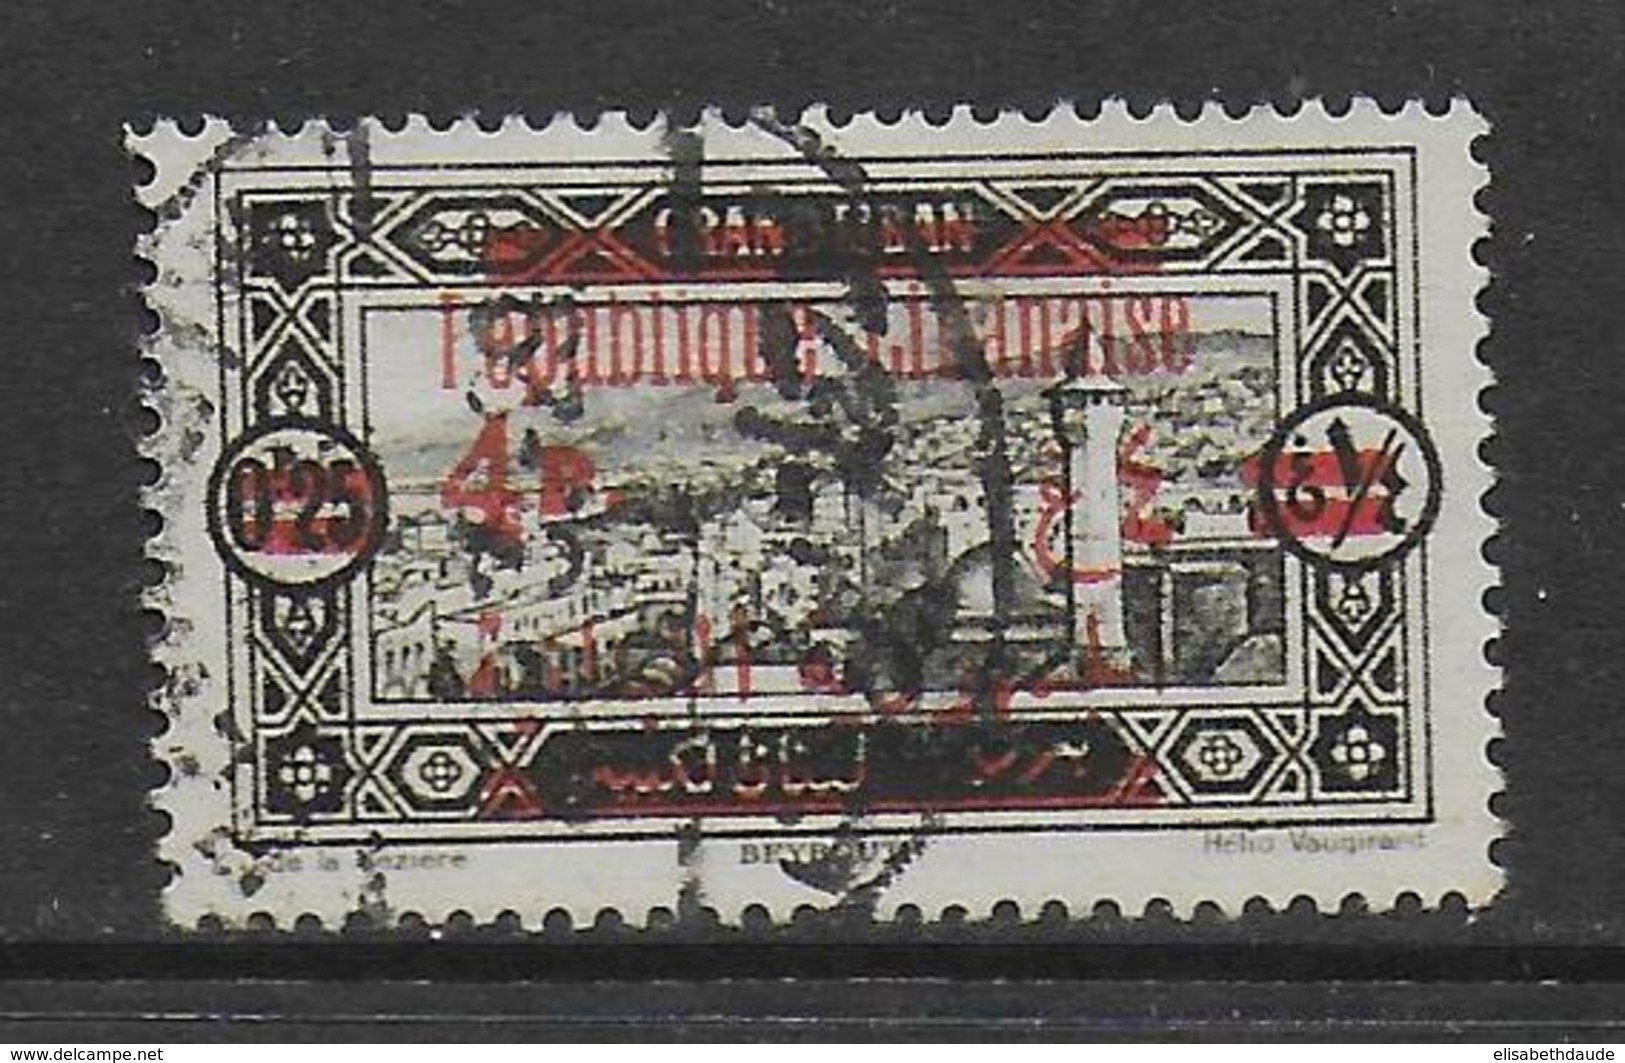 GRAND-LIBAN - 1928 - YVERT N°119 SURCHARGE RECTO-VERSO OBLITERE - COTE = 80 EUR. - Used Stamps